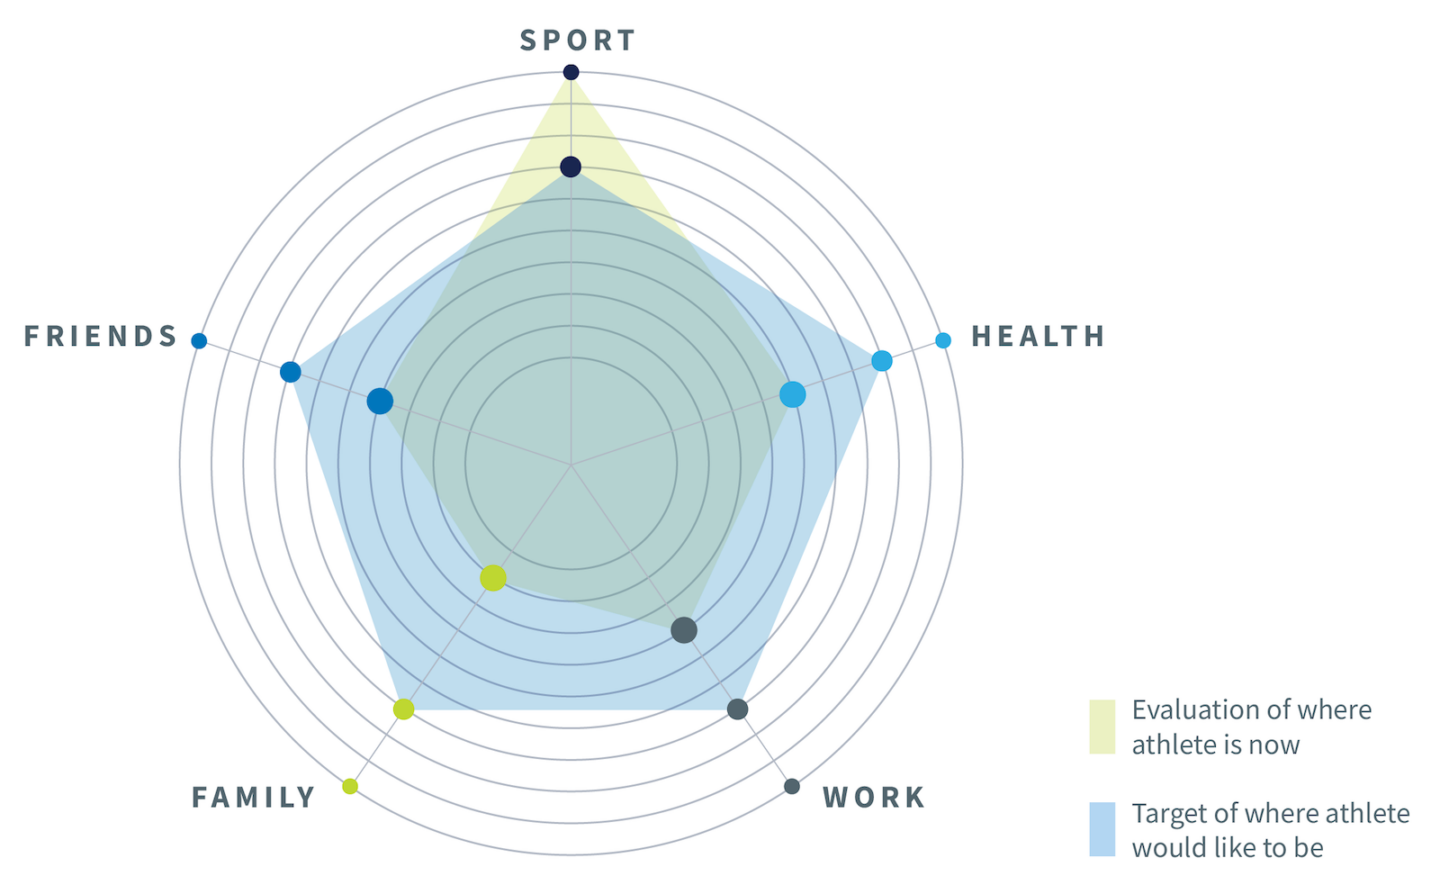 Spider diagram rating sport, friends, health, family, and work, both in terms of the athlete's current assessment (compromised) and target for growth (more balanced)